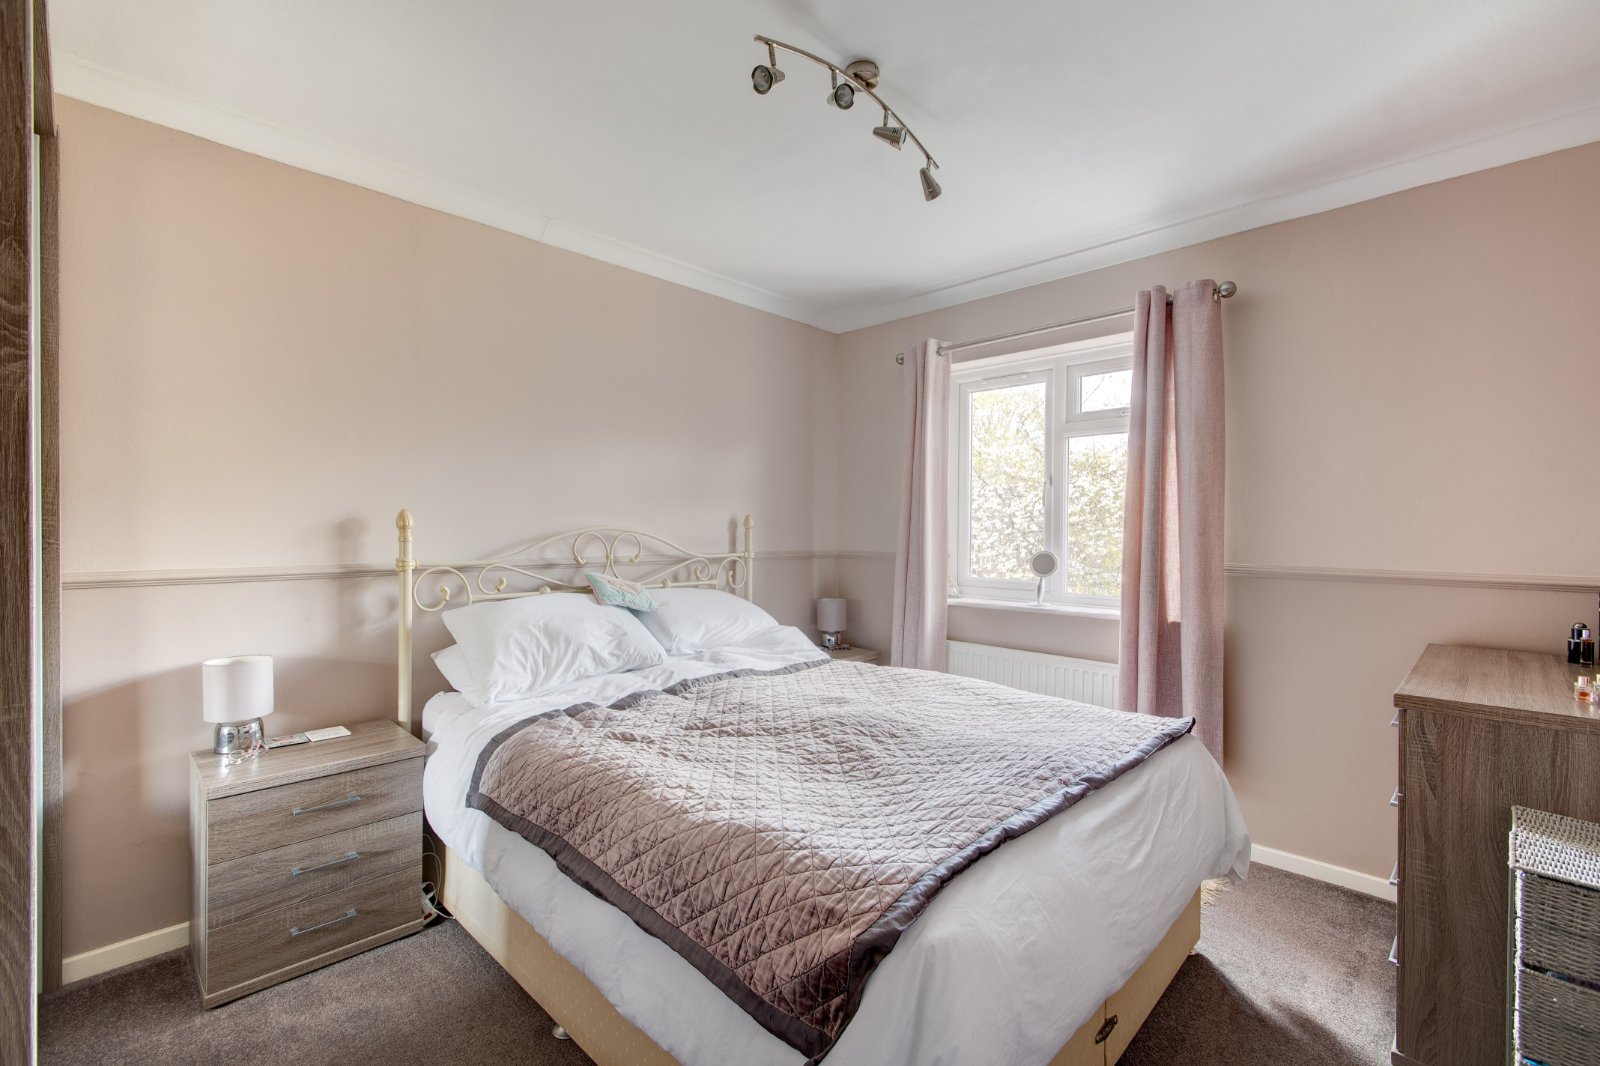 3 bed house for sale in Hopyard Lane, Winyates West  - Property Image 7